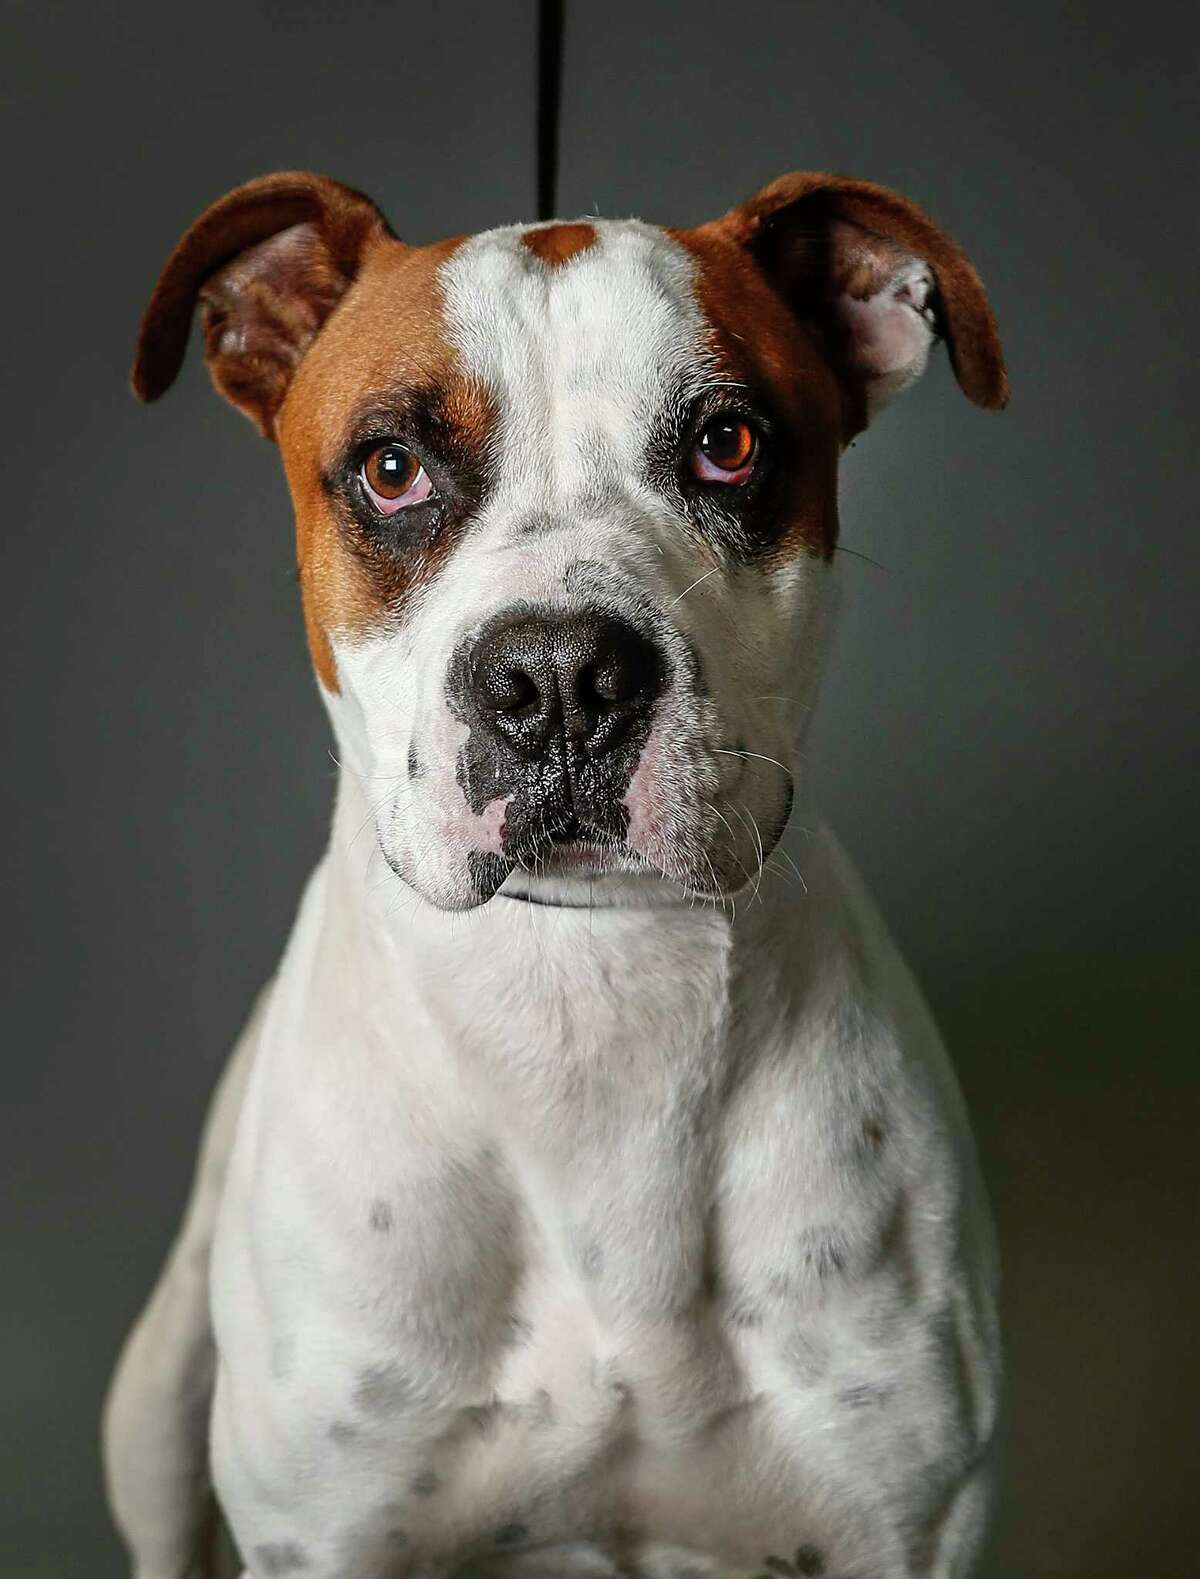 Duke is a 3-year-old, male, Boxer mix available for adoption at the Harris County Animal Shelter, in Houston. (Animal ID: A534276) Photographed Tuesday June 4, 2019. Duke is a big sweetheart, who was surrendered by his owner because they were moving, and moved without him.